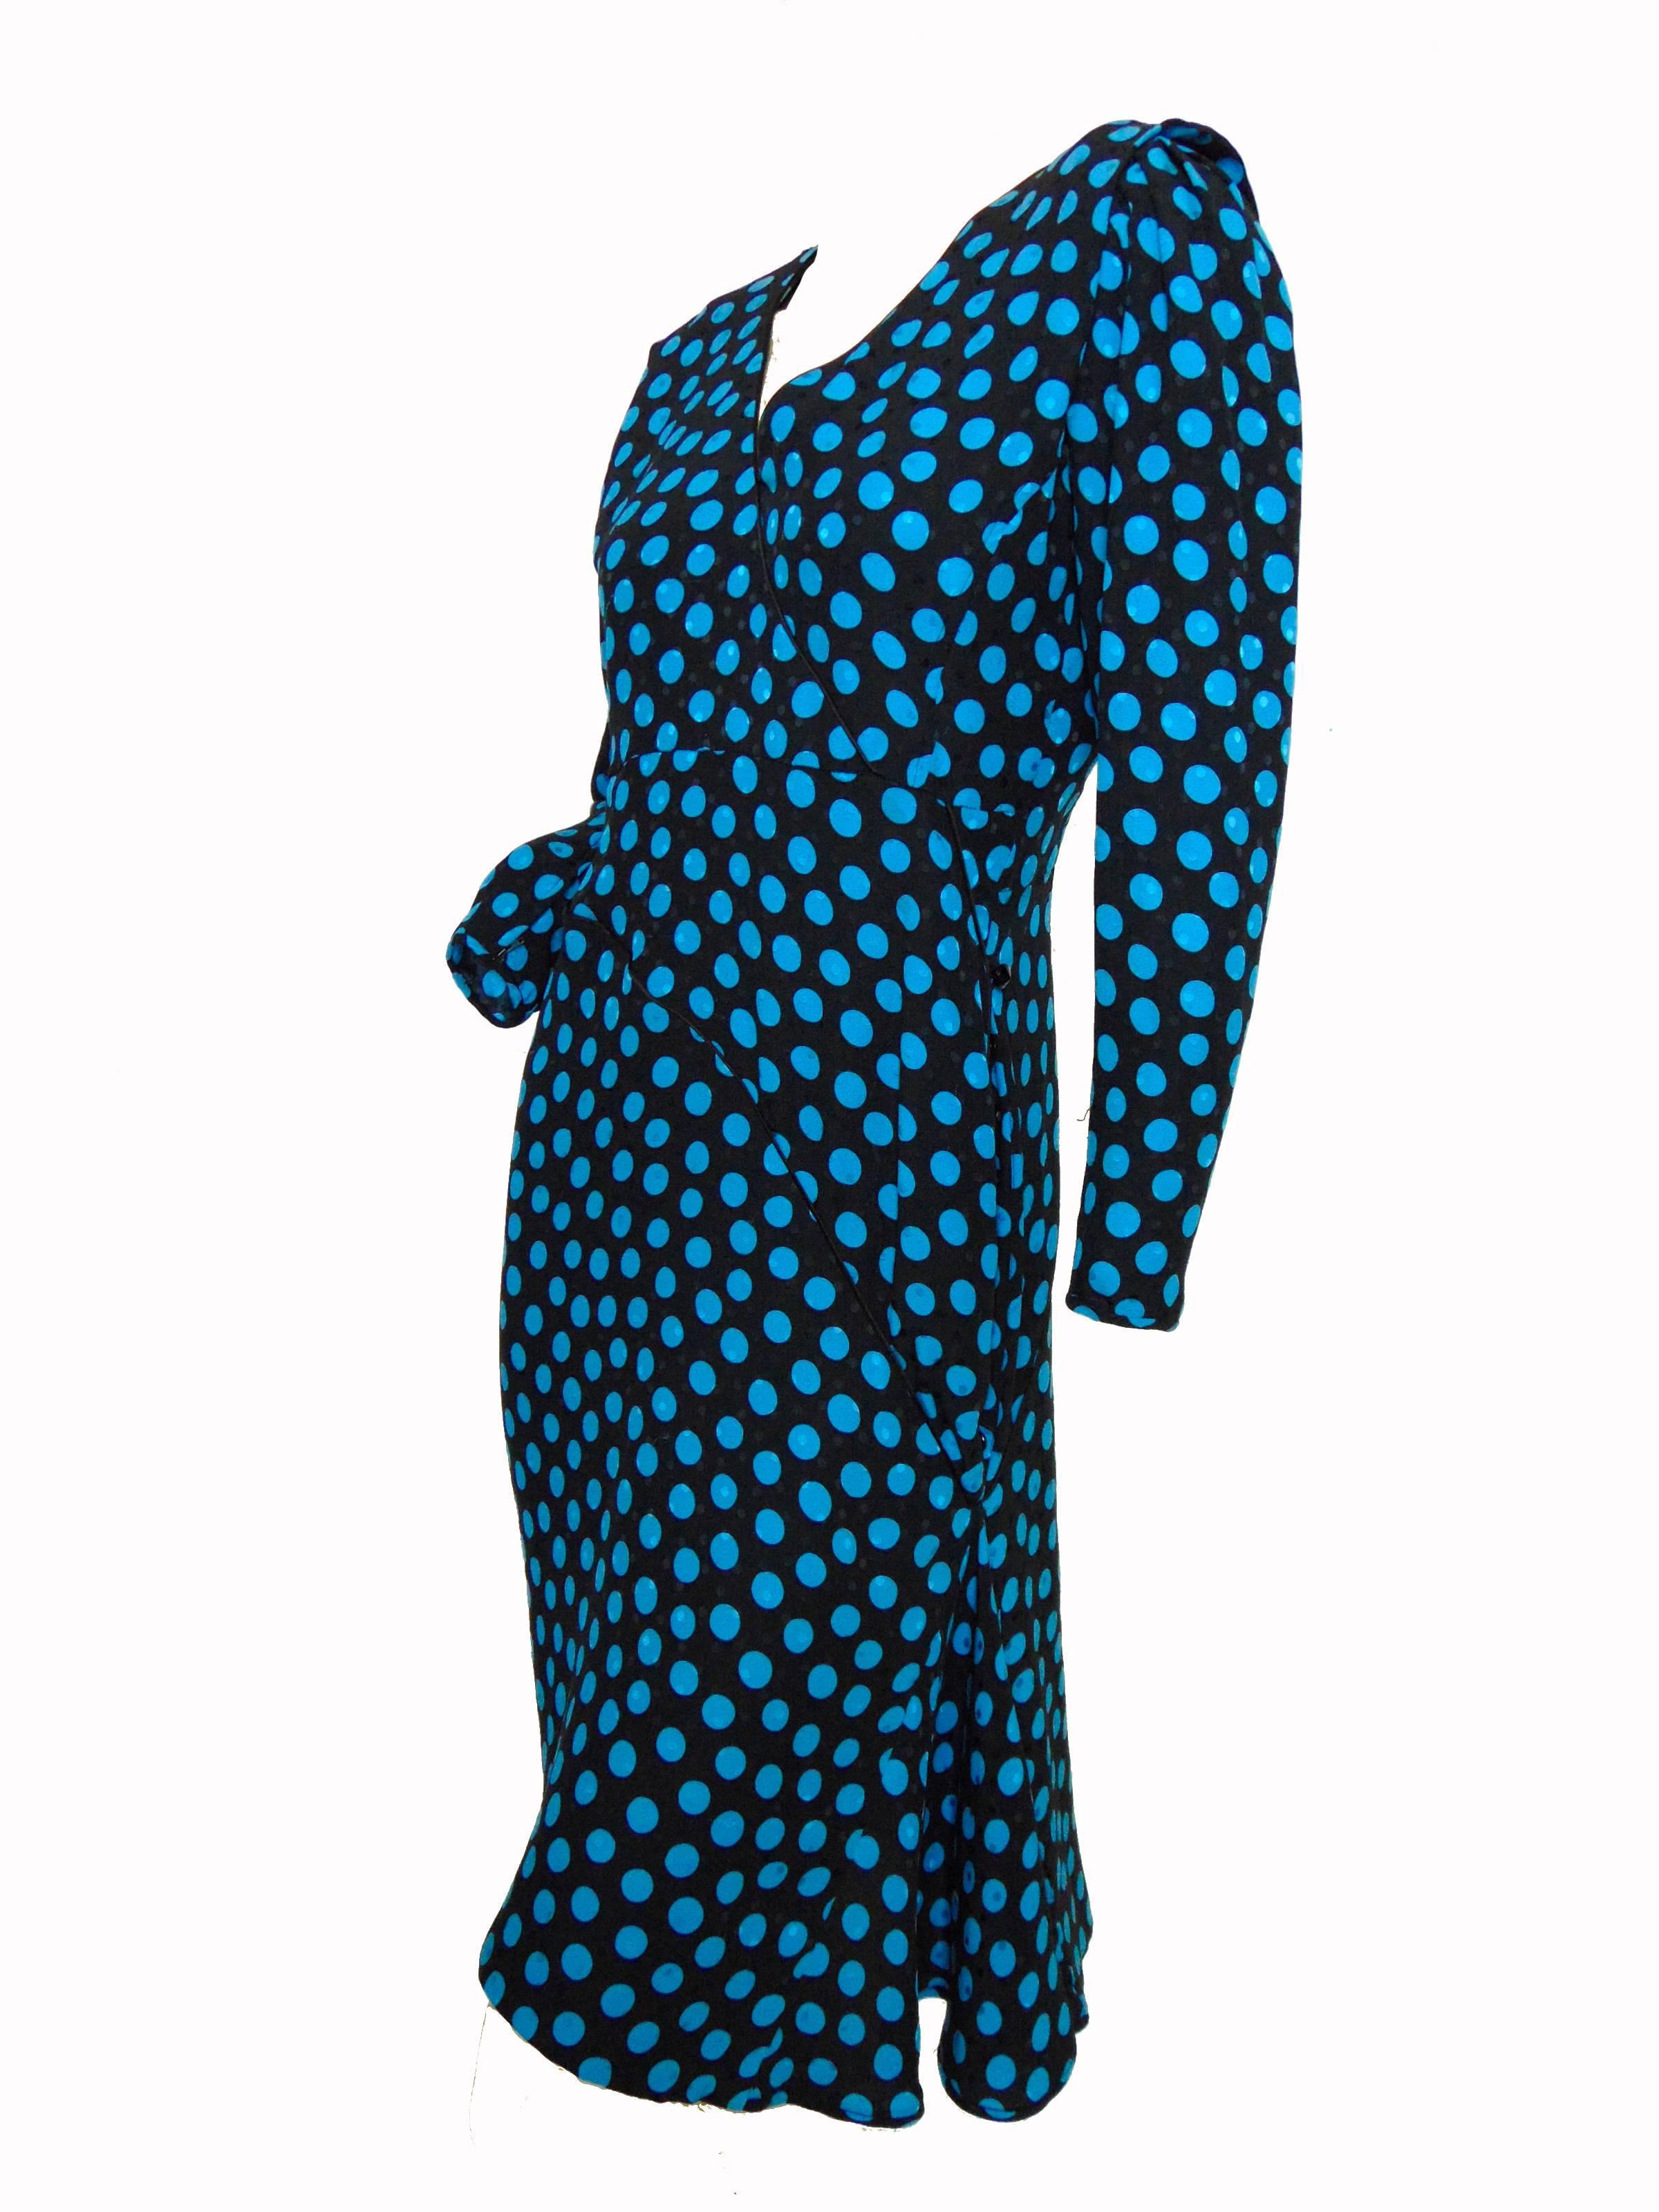 Blue Emanuel Ungaro Parallele Silk Dress with Polka Dots 1980s Size S